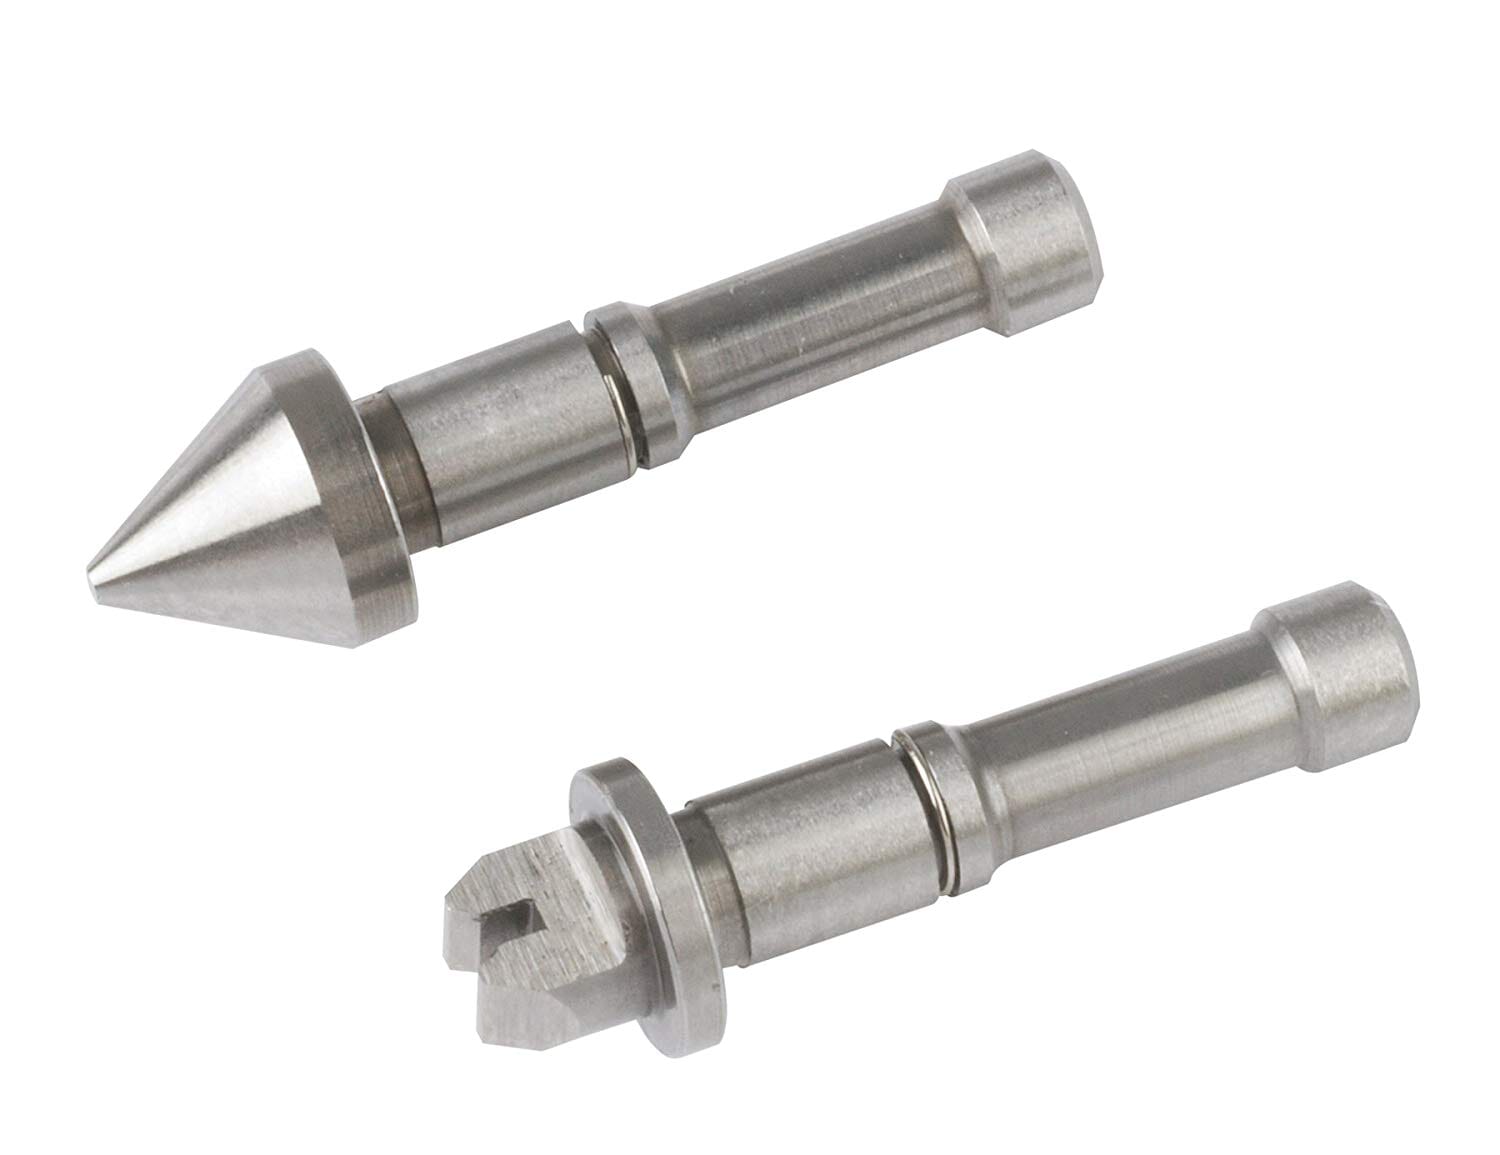 Mitutoyo Anvil And Spindle Tip 3.5 - 5Mm/8 -5 Tpi